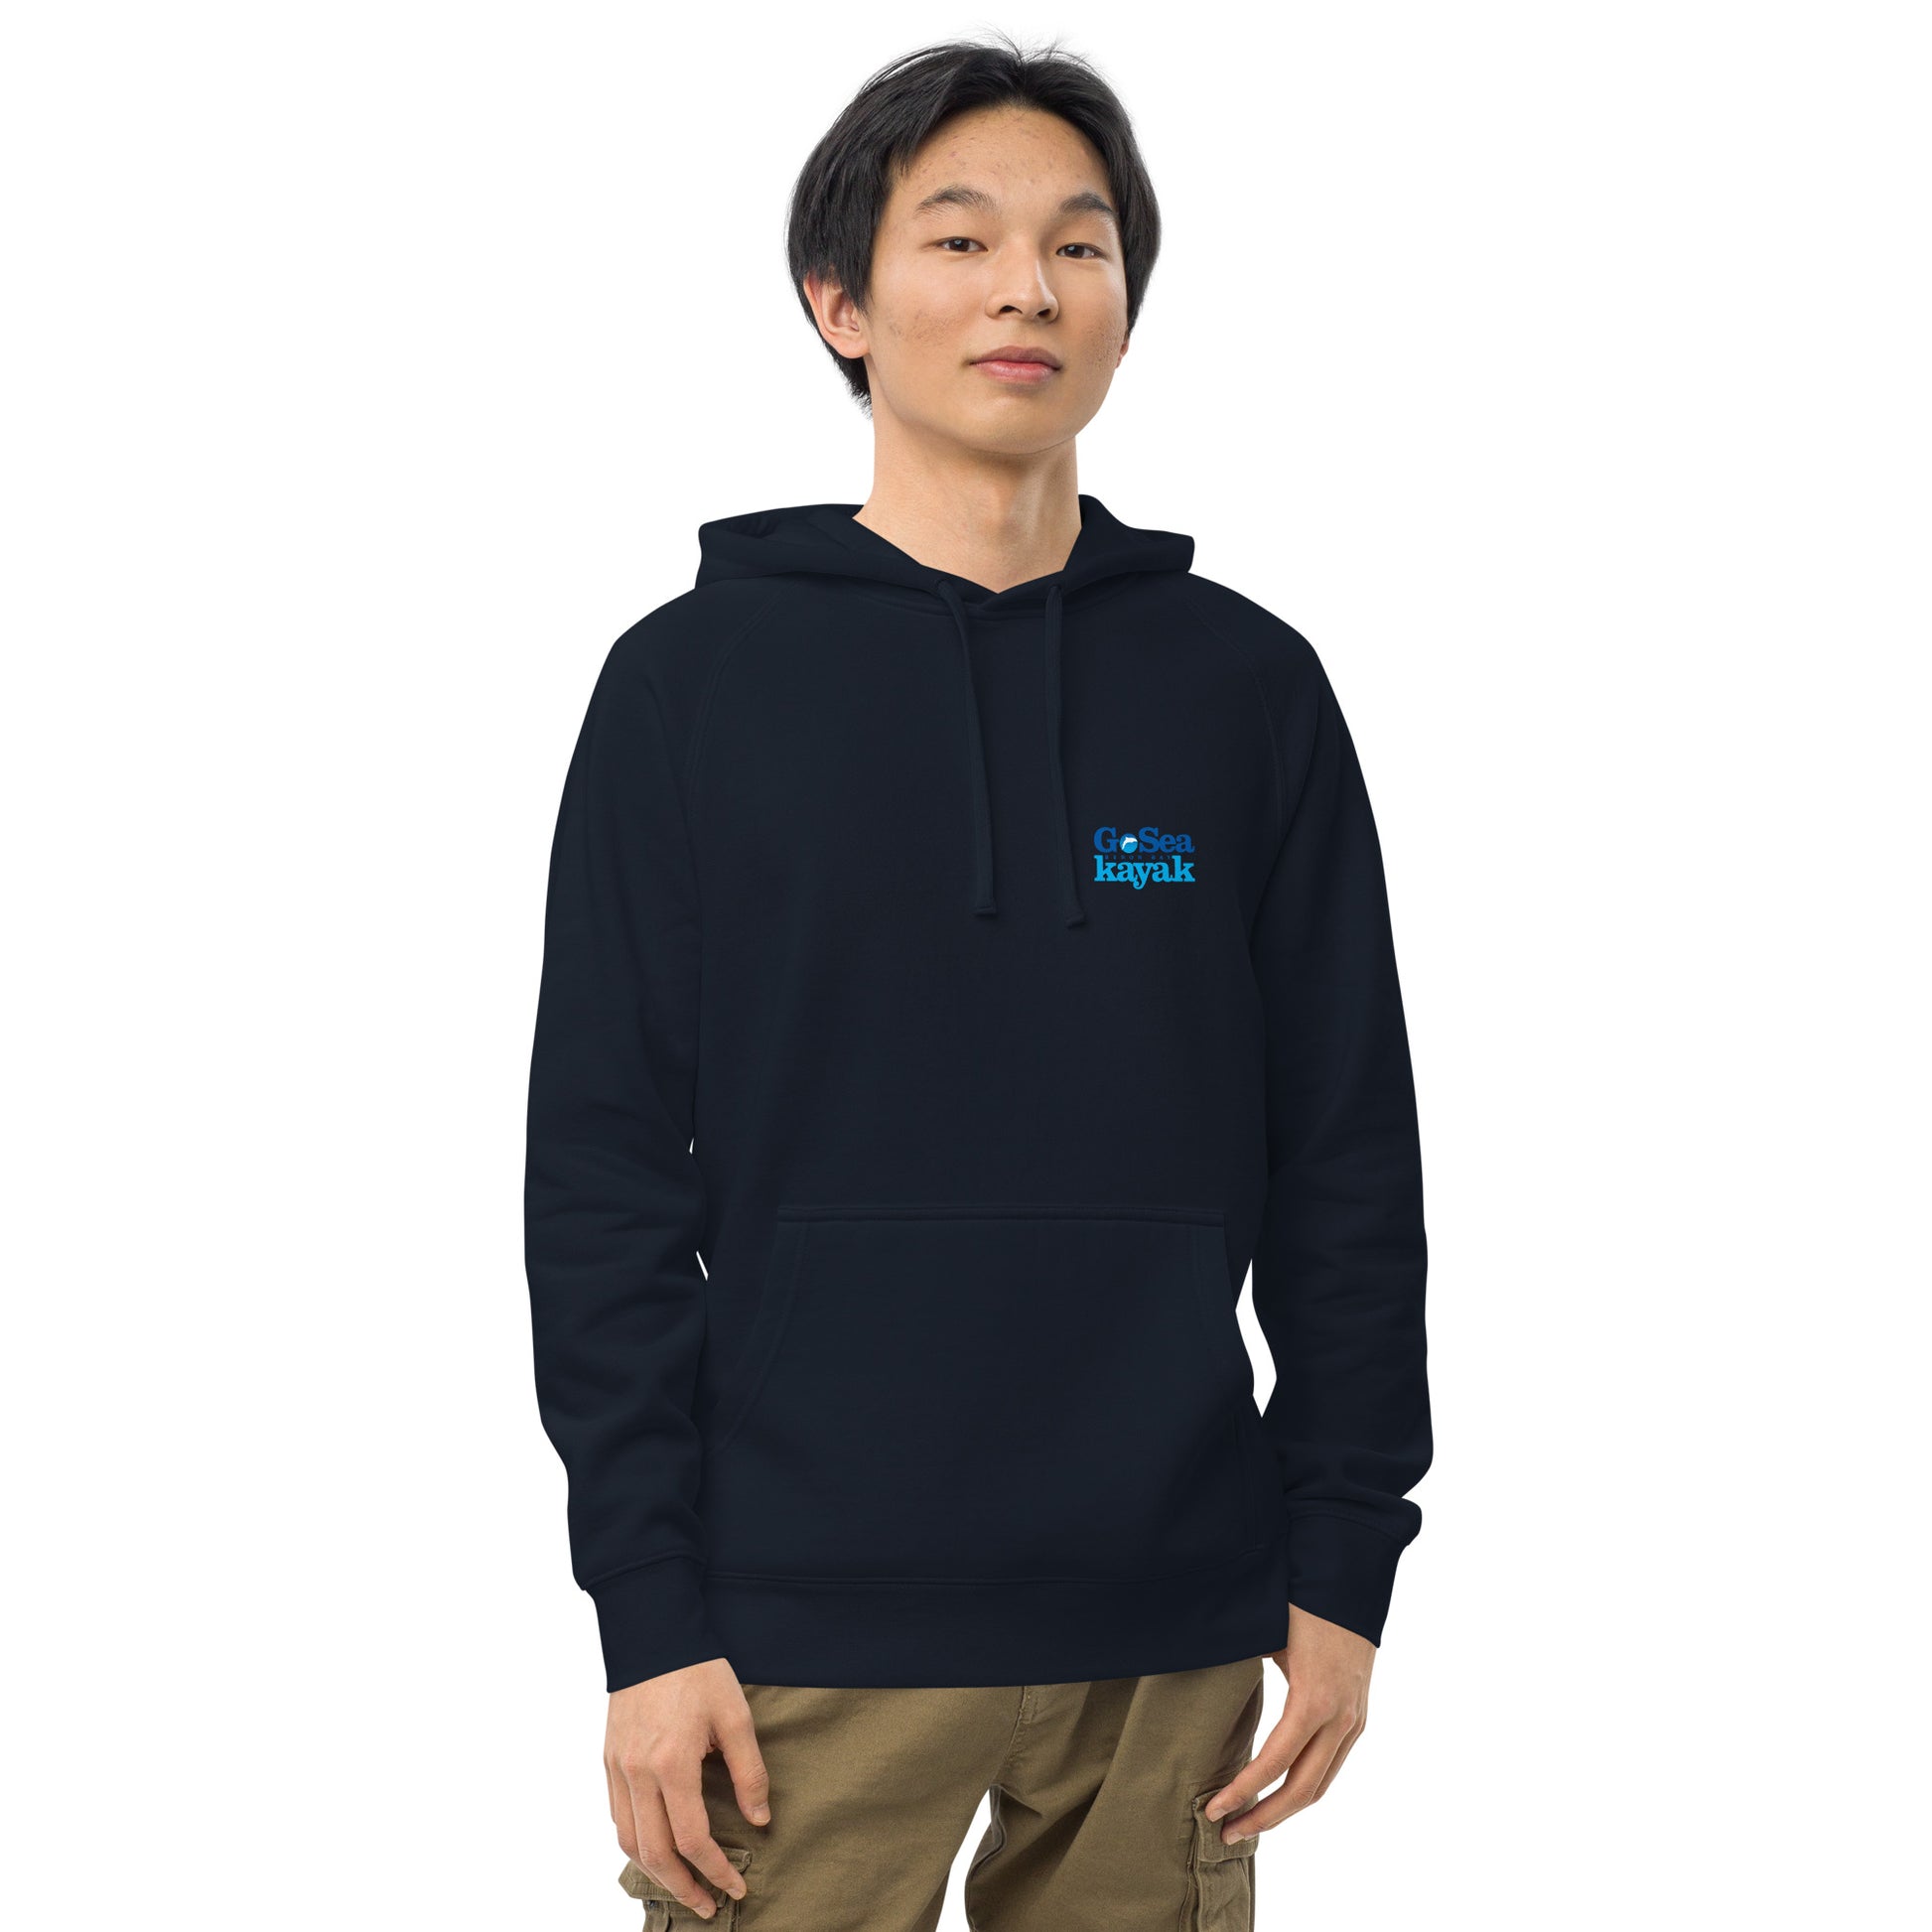  Unisex Hoodie - Navy - Front view being warn by man with arms by side - Go Sea Kayak Byron Bay logo on back and front, Kangaroo pocket on front - Genuine Byron Bay Merchandise | Produced by Go Sea Kayak Byron Bay 